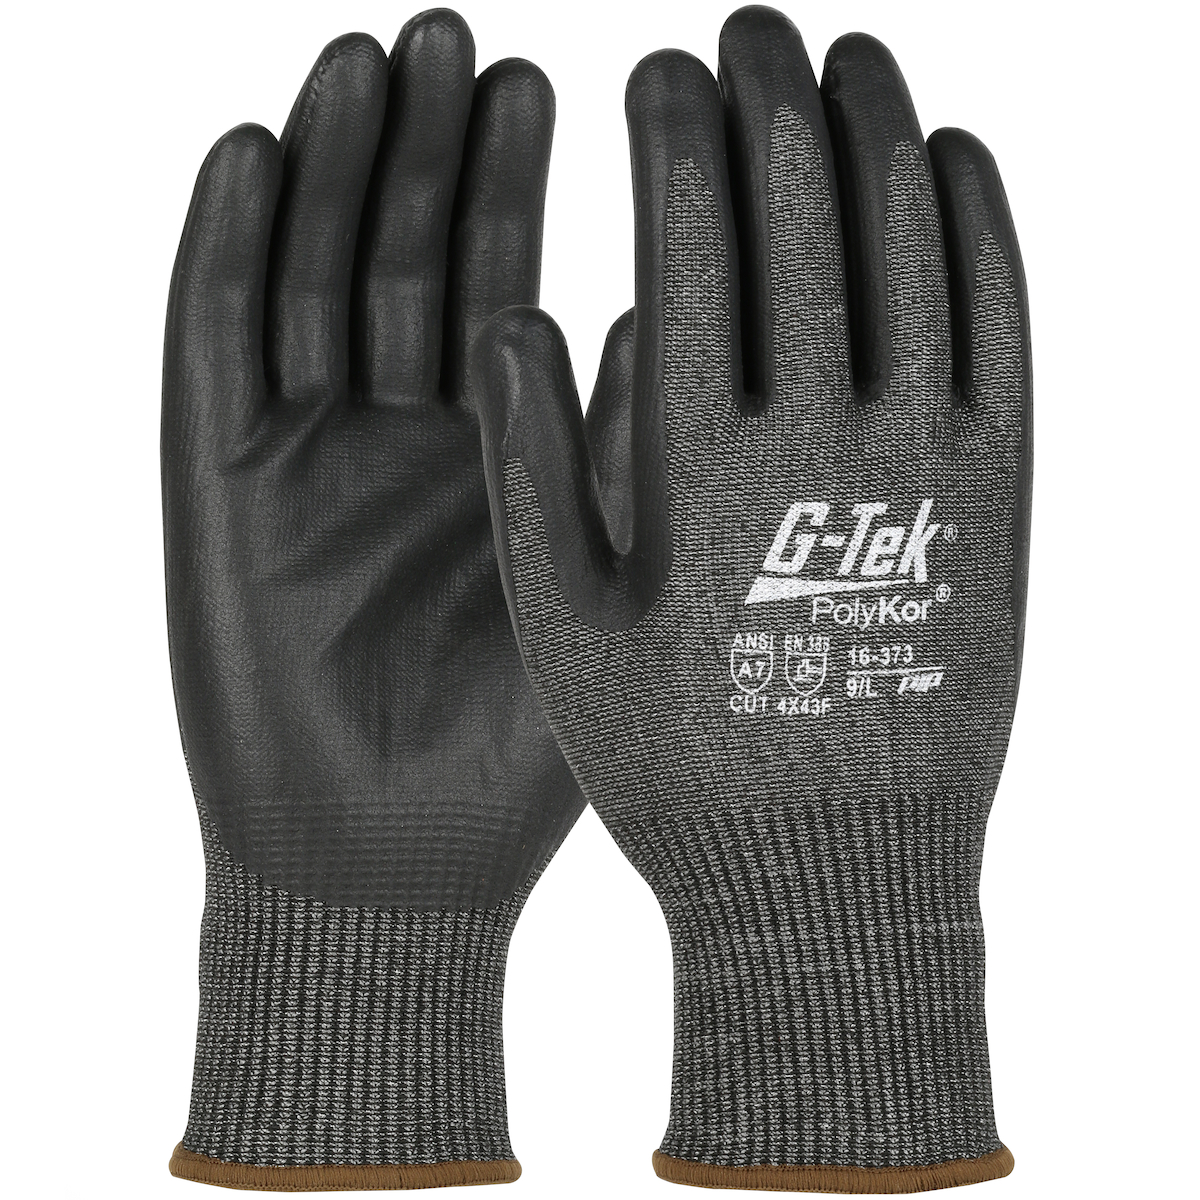 #16-373 PIP® G-Tek®  Seamless Knit PolyKor®  Glove with Nitrile Coated Grip on Palm & Fingers - Touchscreen Compatible 